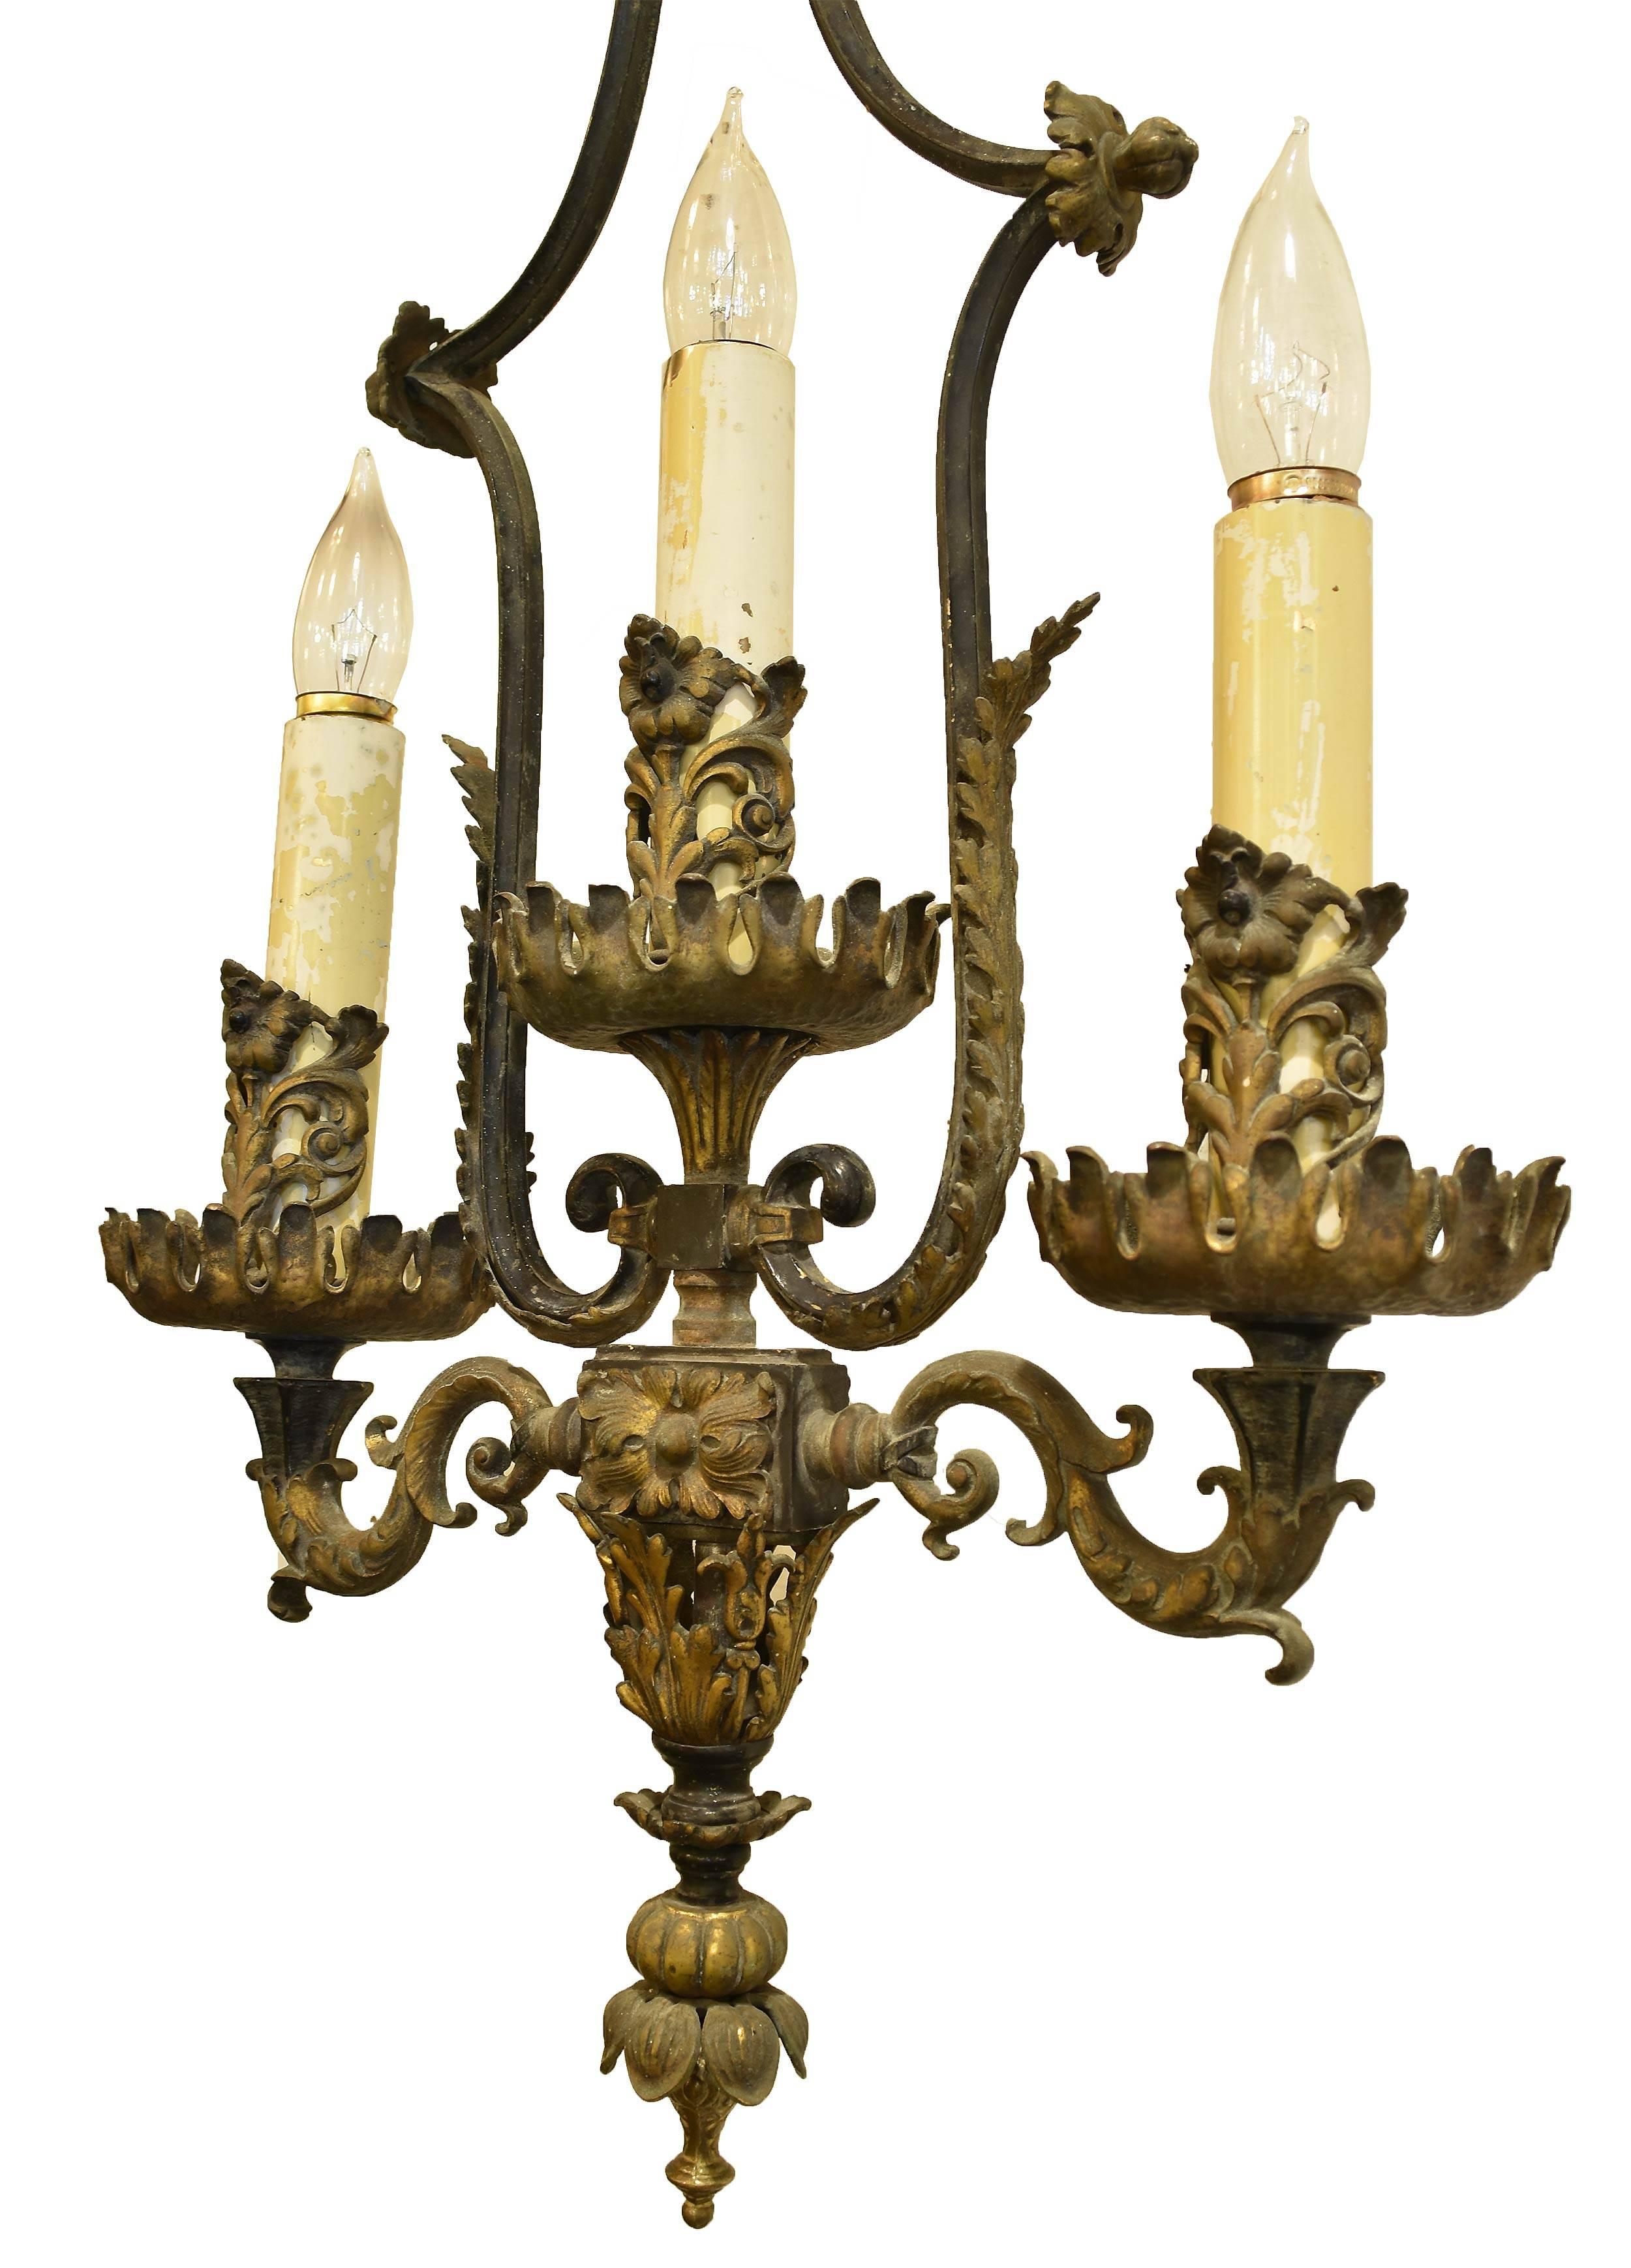 This Empire style, oversized brass and bronze sconce drapes down from its solid backplate. Each of the three candles is surrounded with a centre flower and garland at its base. Solid construction with a open wispy feeling. Stately in any foyer,